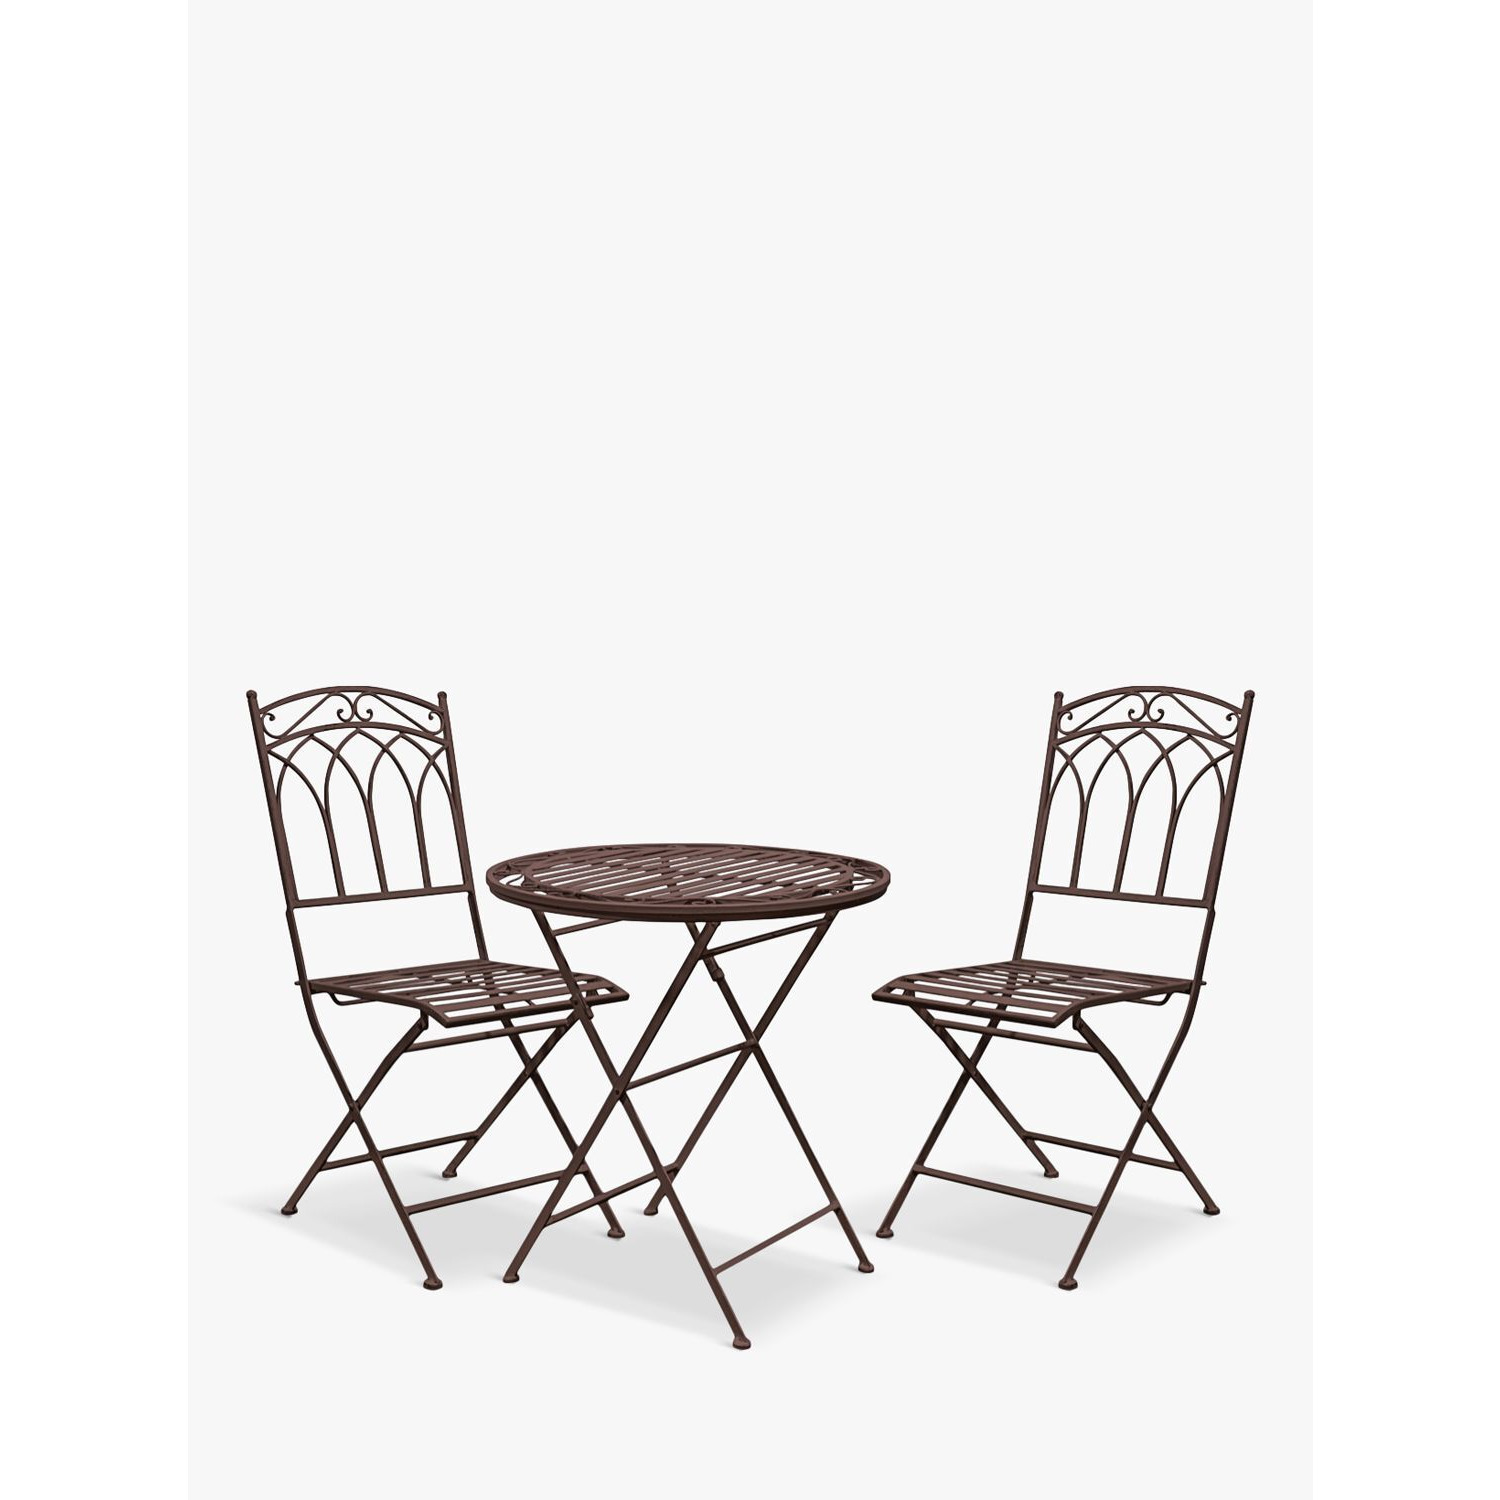 Gallery Direct Aventino Folding Metal Garden Bistro Table & Chairs Set - image 1